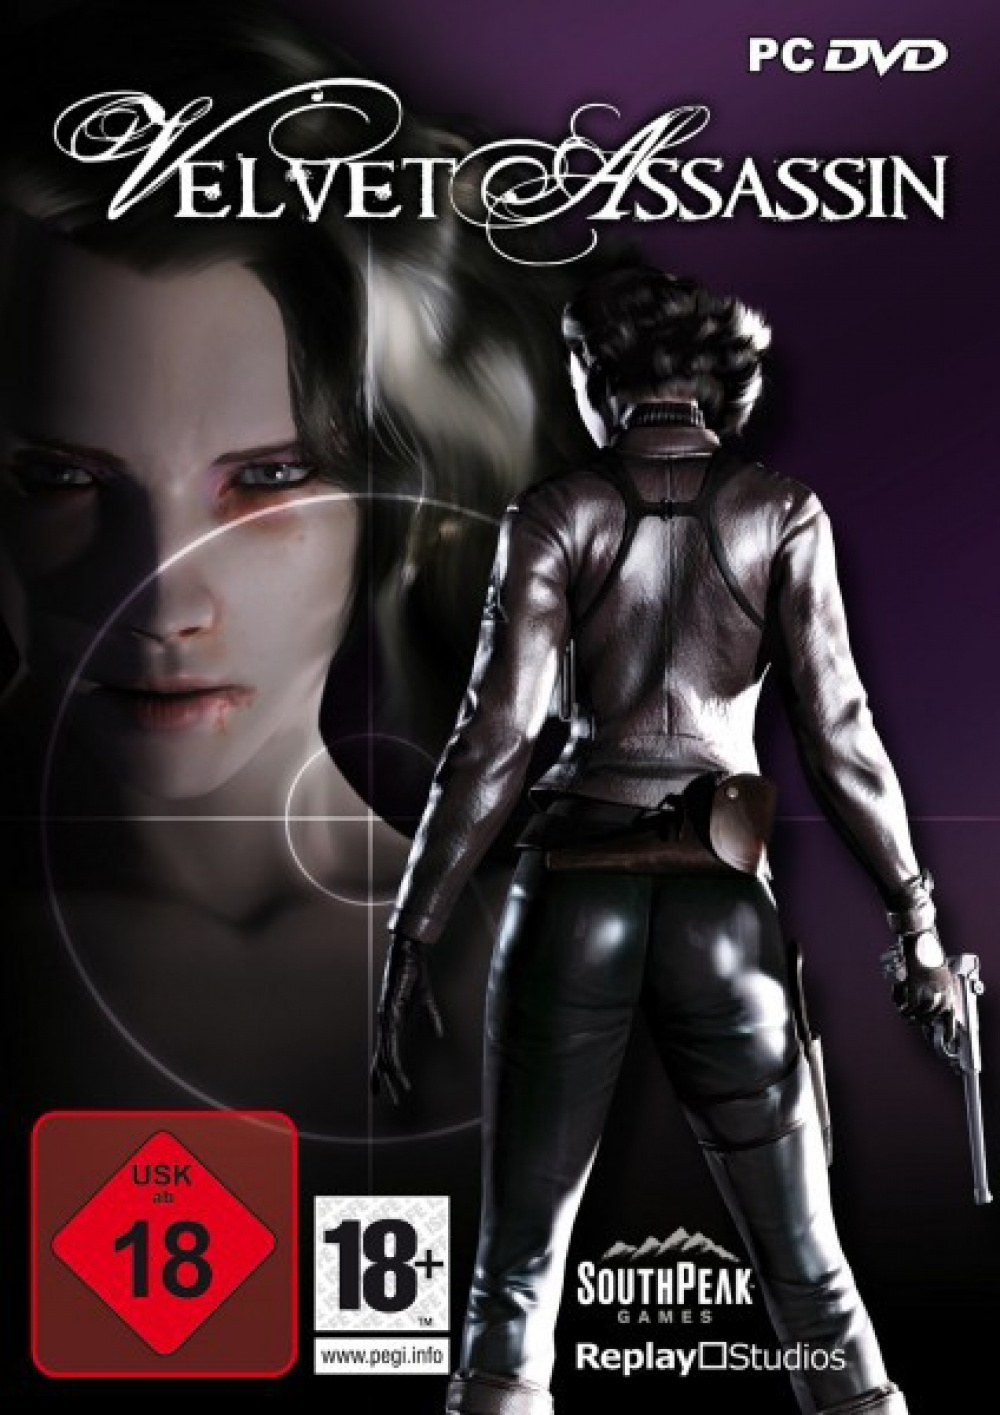 Velvet Assassin Video Game Reviews And Previews Pc Ps4 Xbox One And Mobile